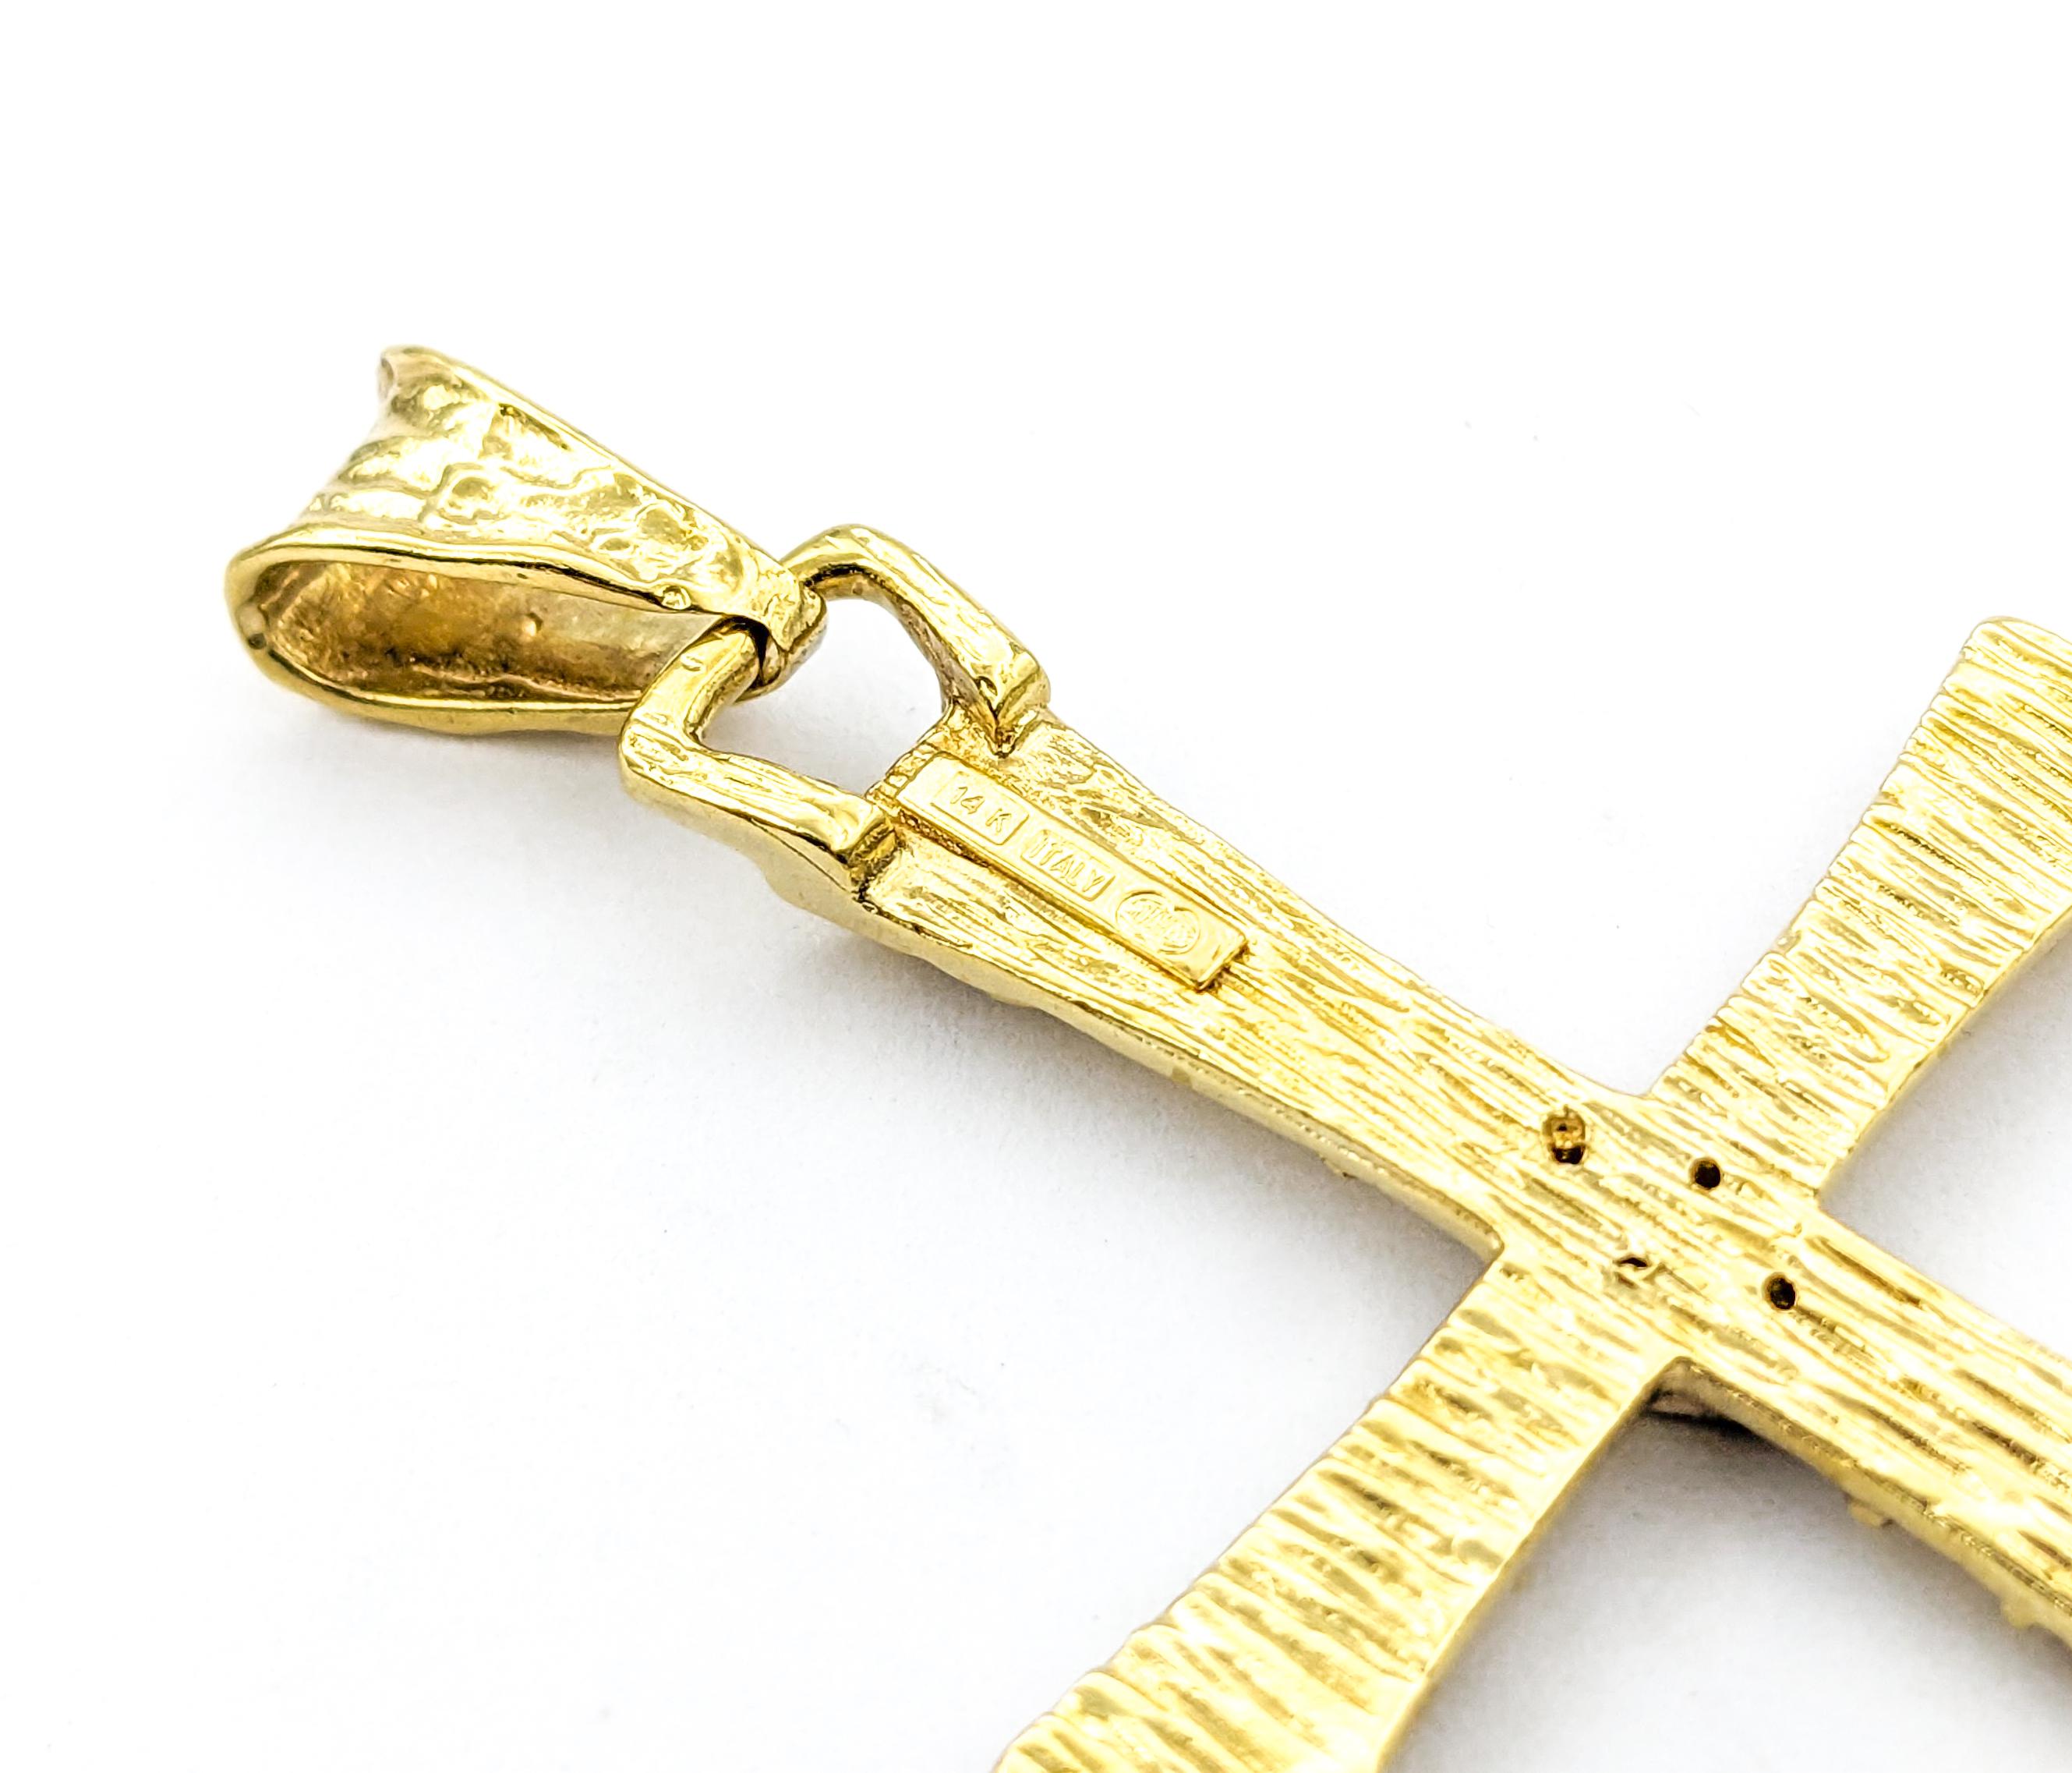 Diamond Cross Pendant In Yellow Gold

Showcasing a magnificent Diamond Fashion Pendant, meticulously designed in 14kt Yellow Gold. This exquisite piece highlights a textured cross design, adorned with .04ctw diamonds that sparkle with I clarity and